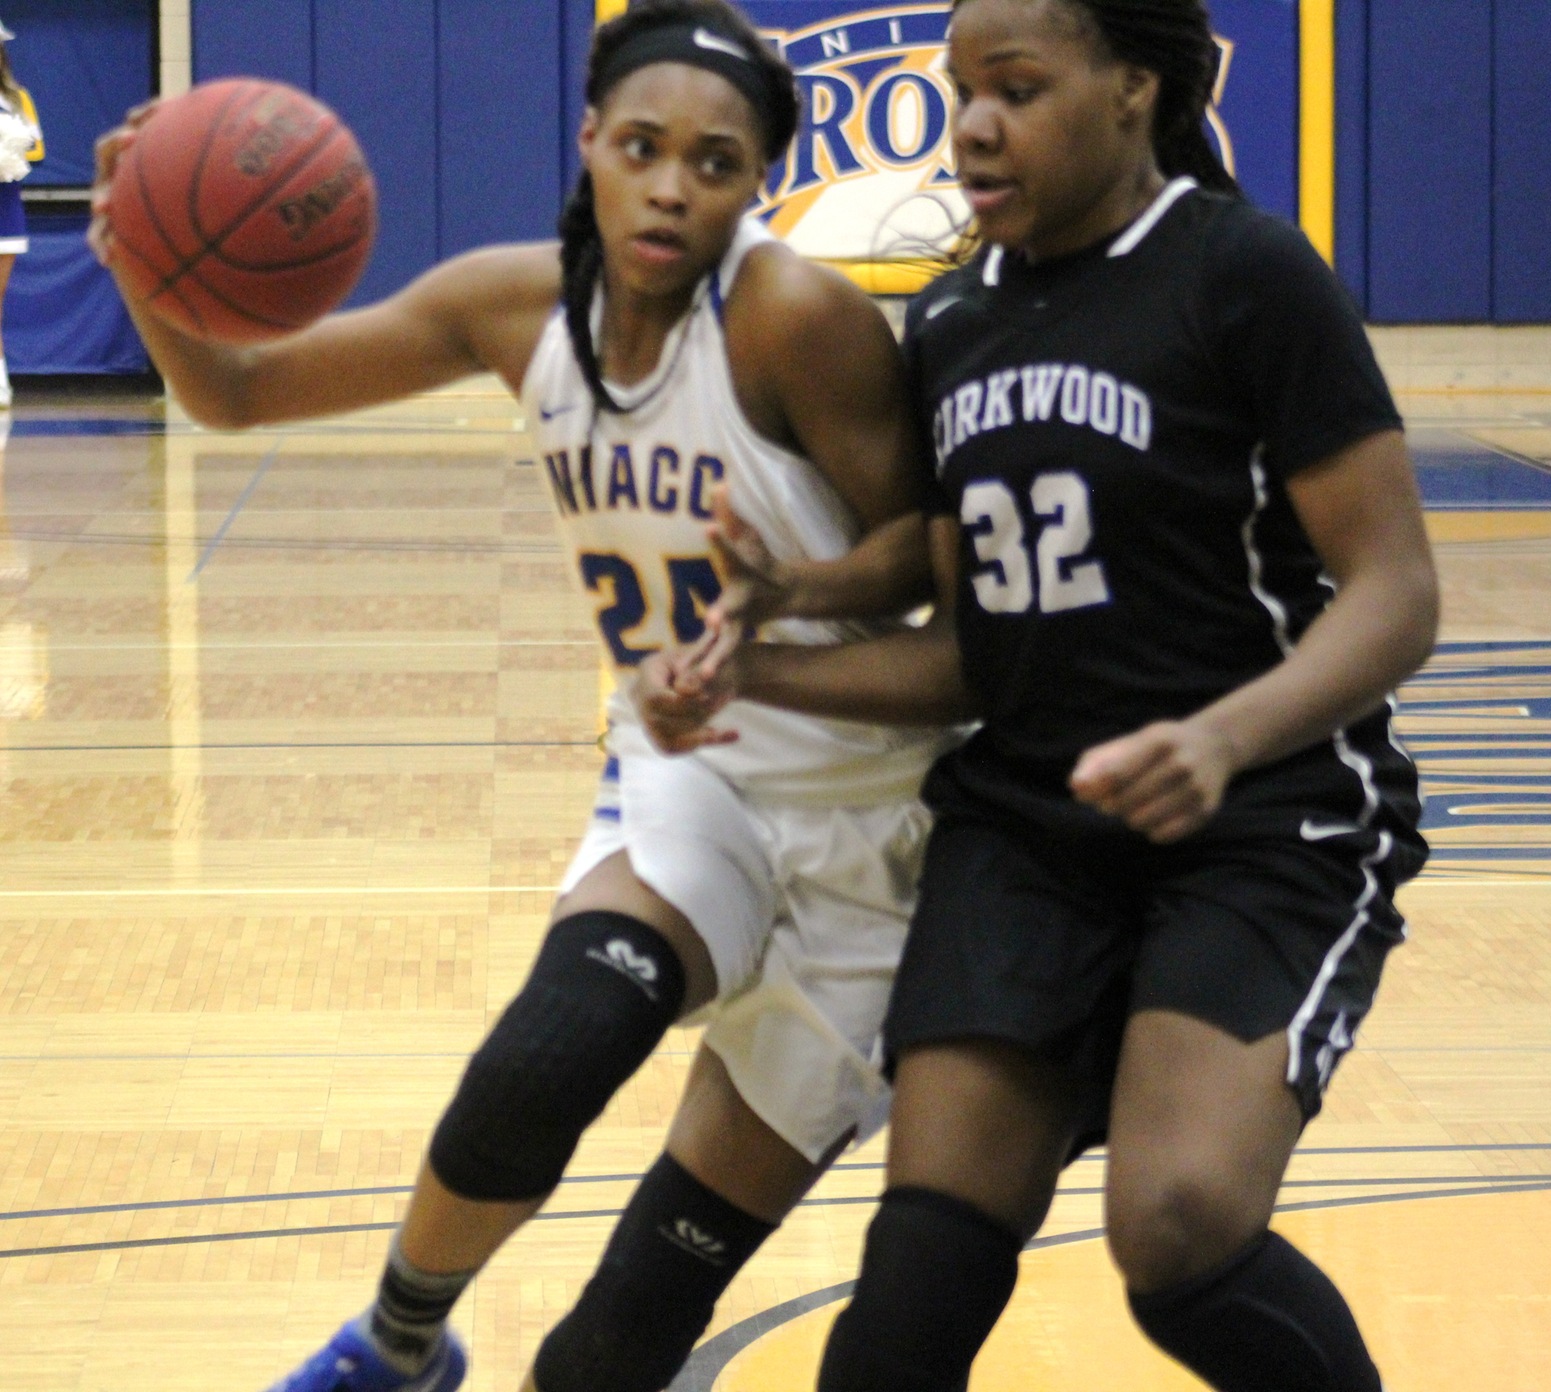 NIACC's Khalilah Holloway drives to the basket in the first half of Wednesday's game against No. 1 Kirkwood.